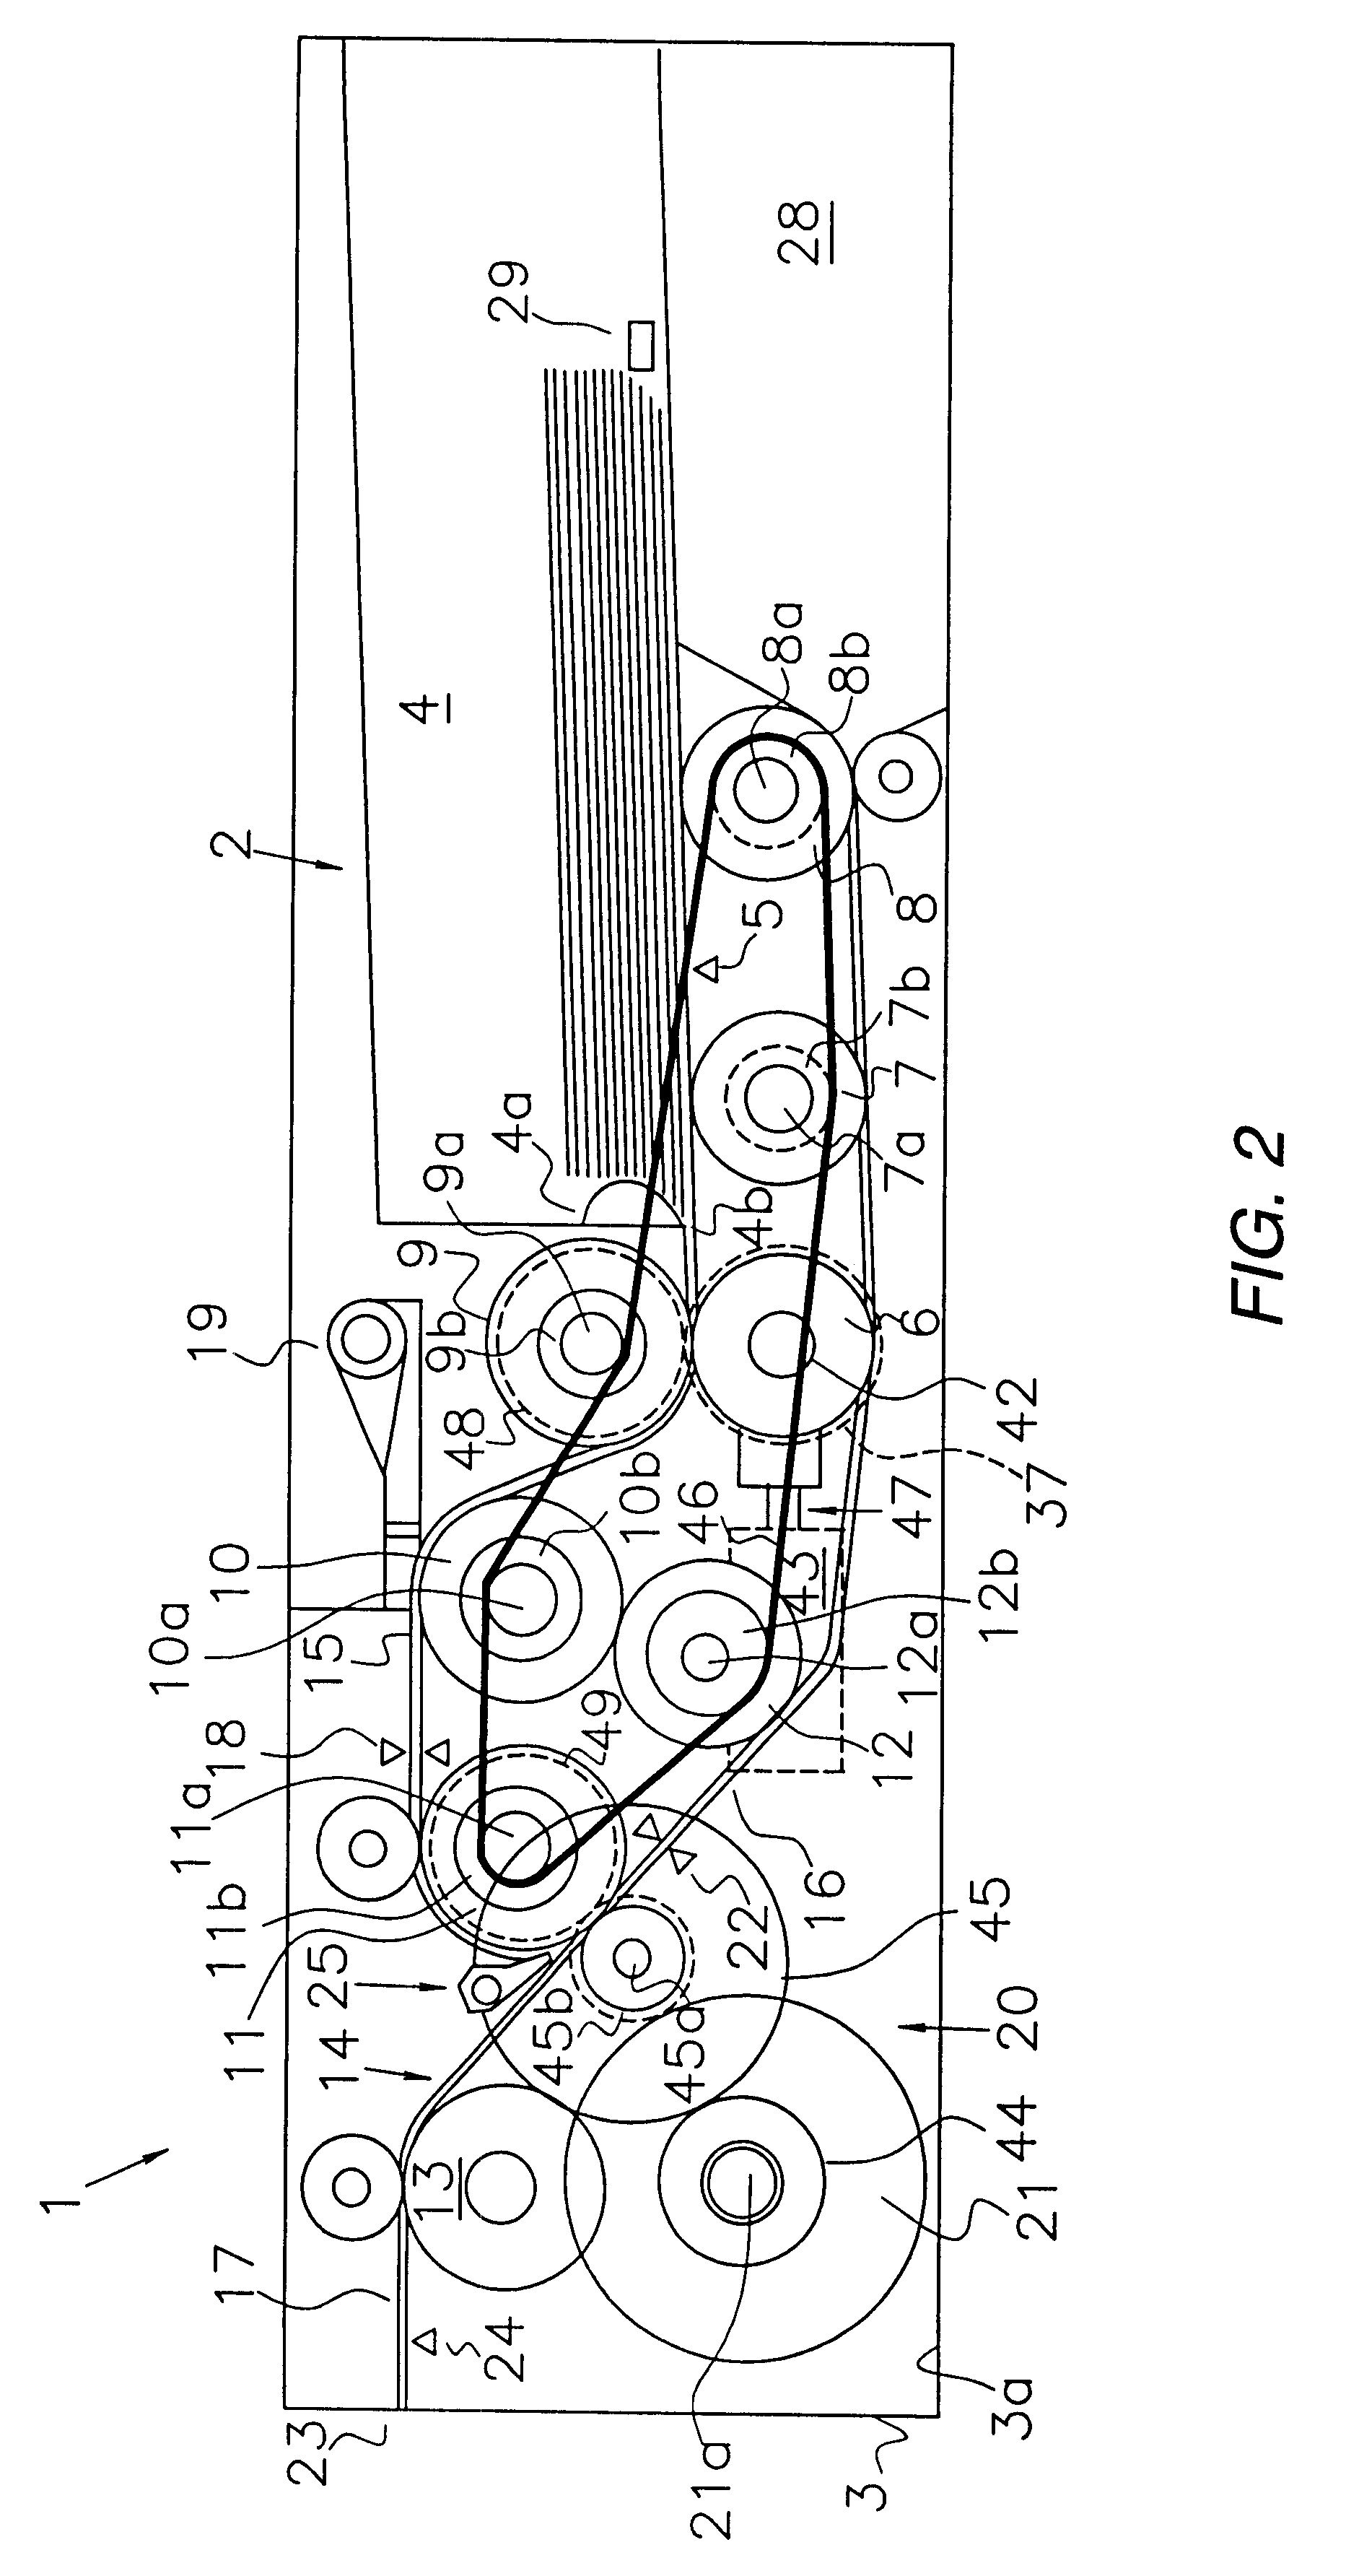 Method and apparatus for issuing coupons for a gaming machine